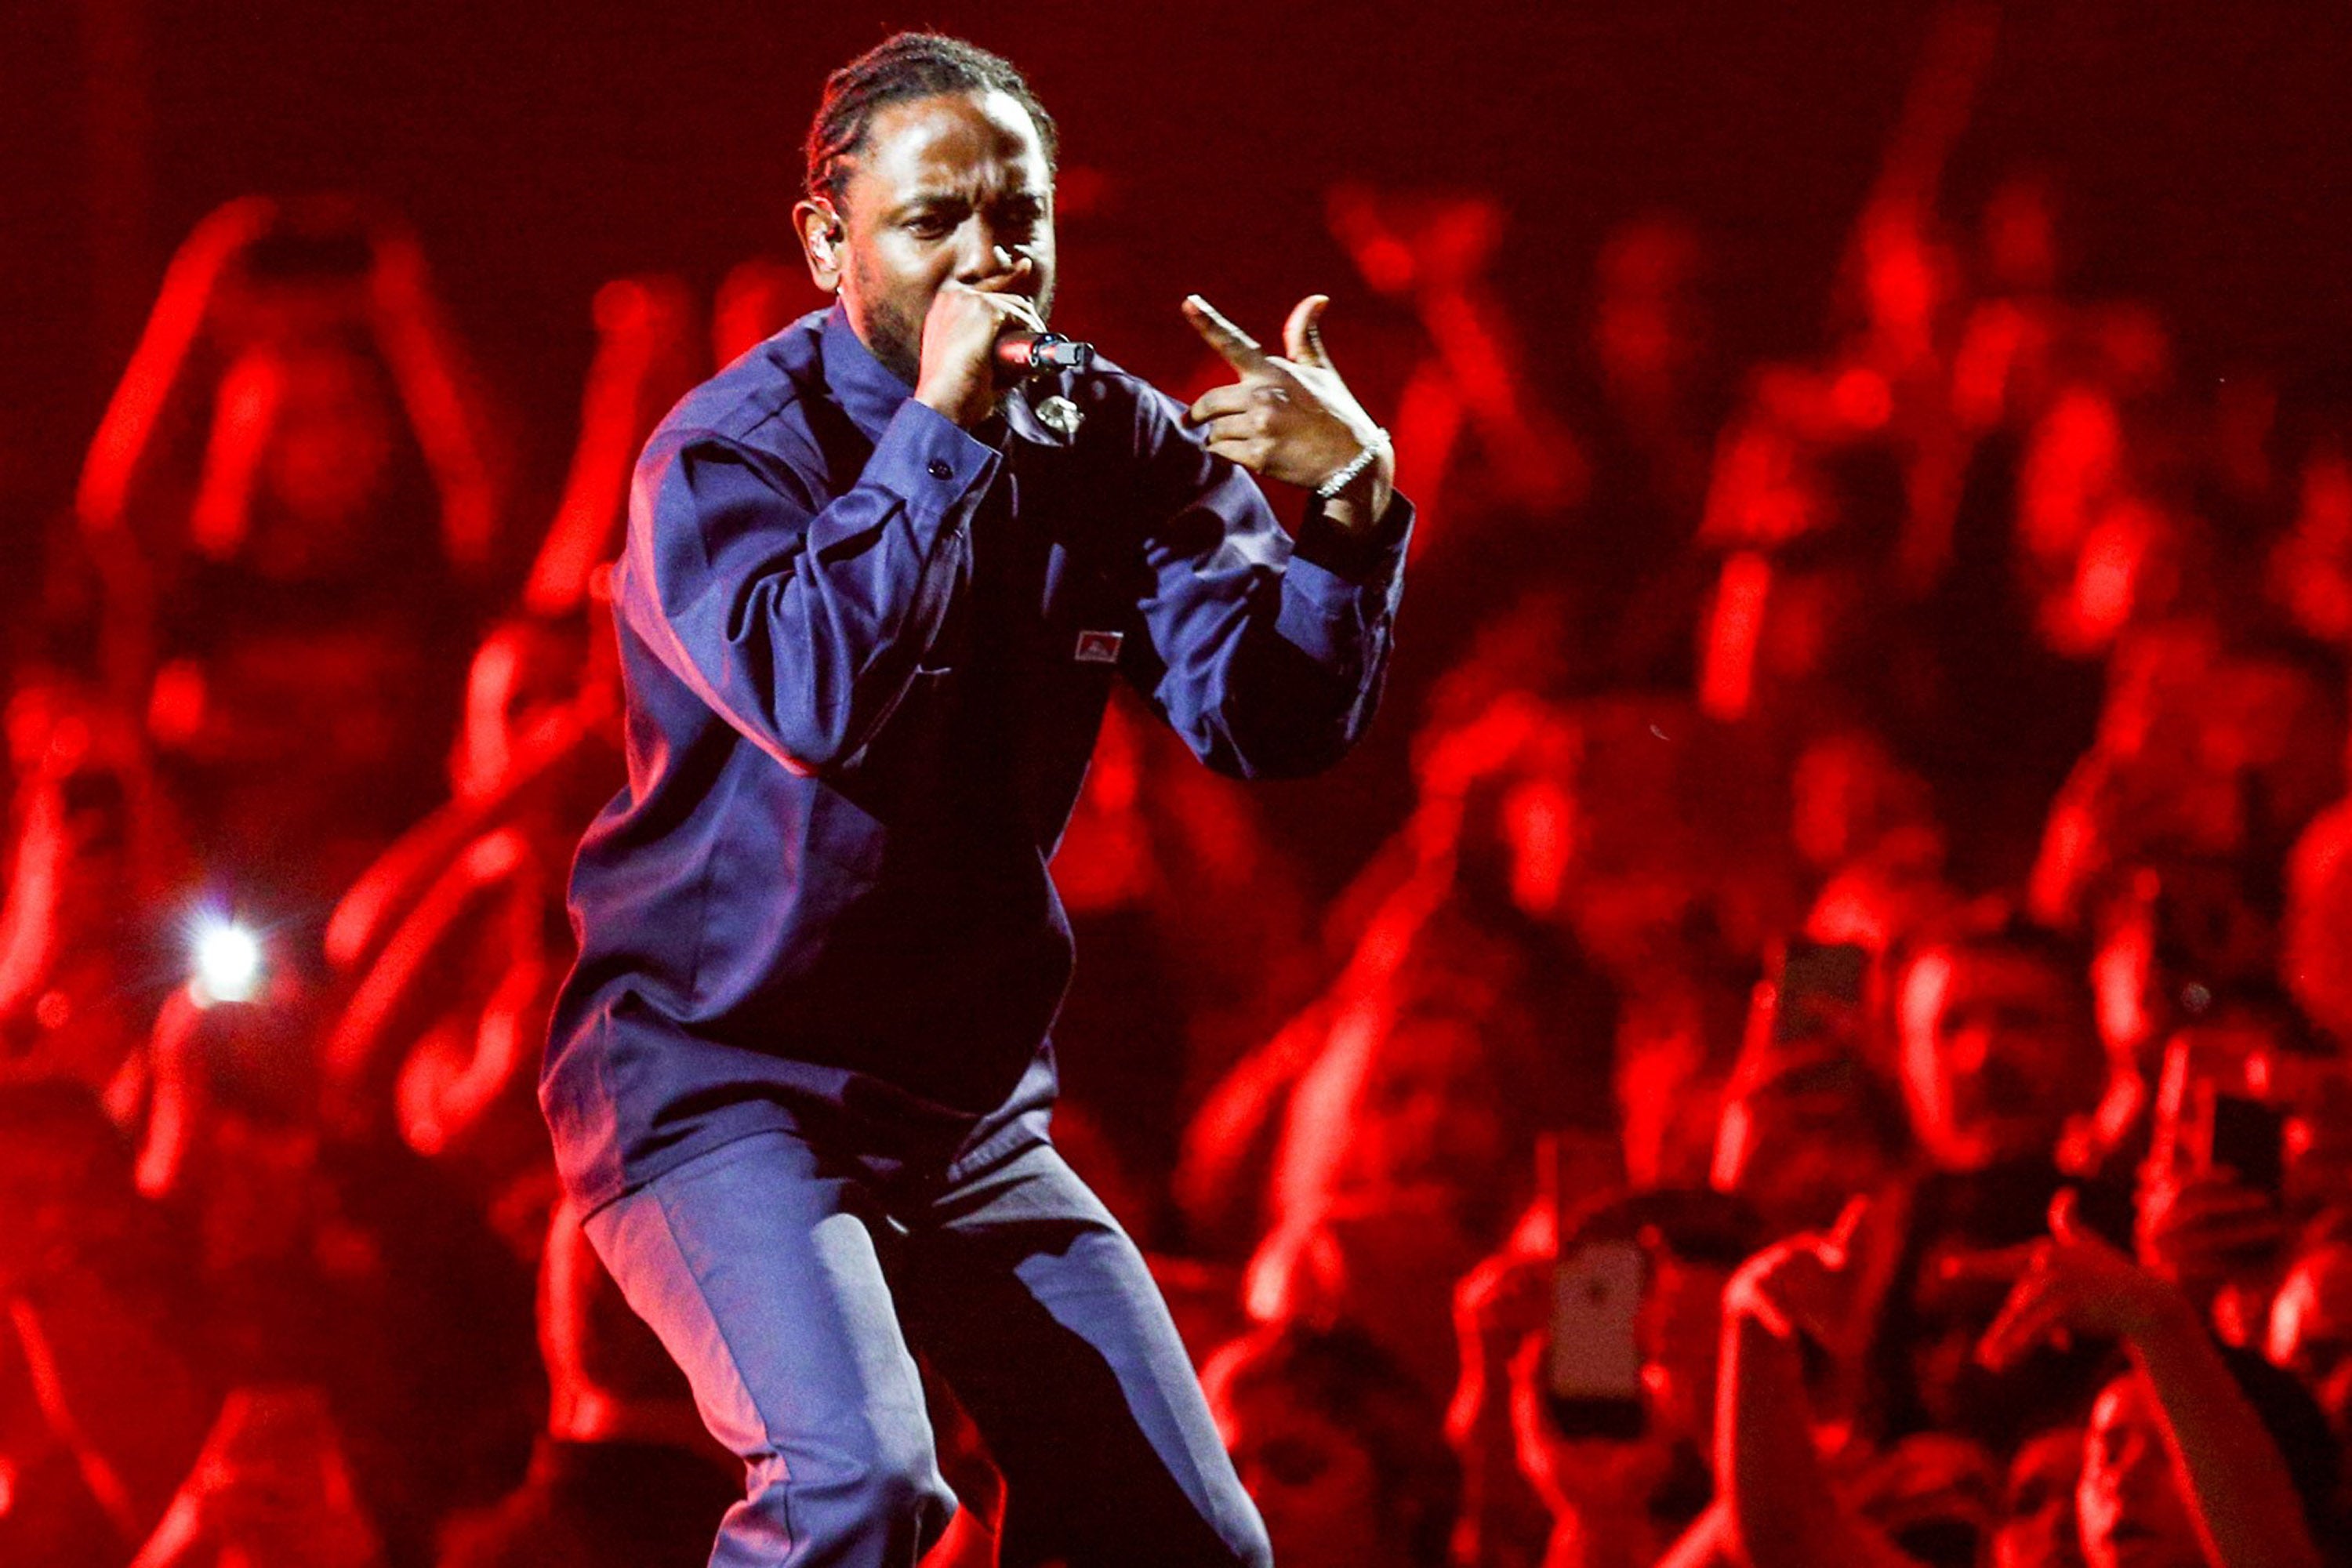 Watch Kendrick Lamar's Big Steppers Tour Show From Paris on 10th